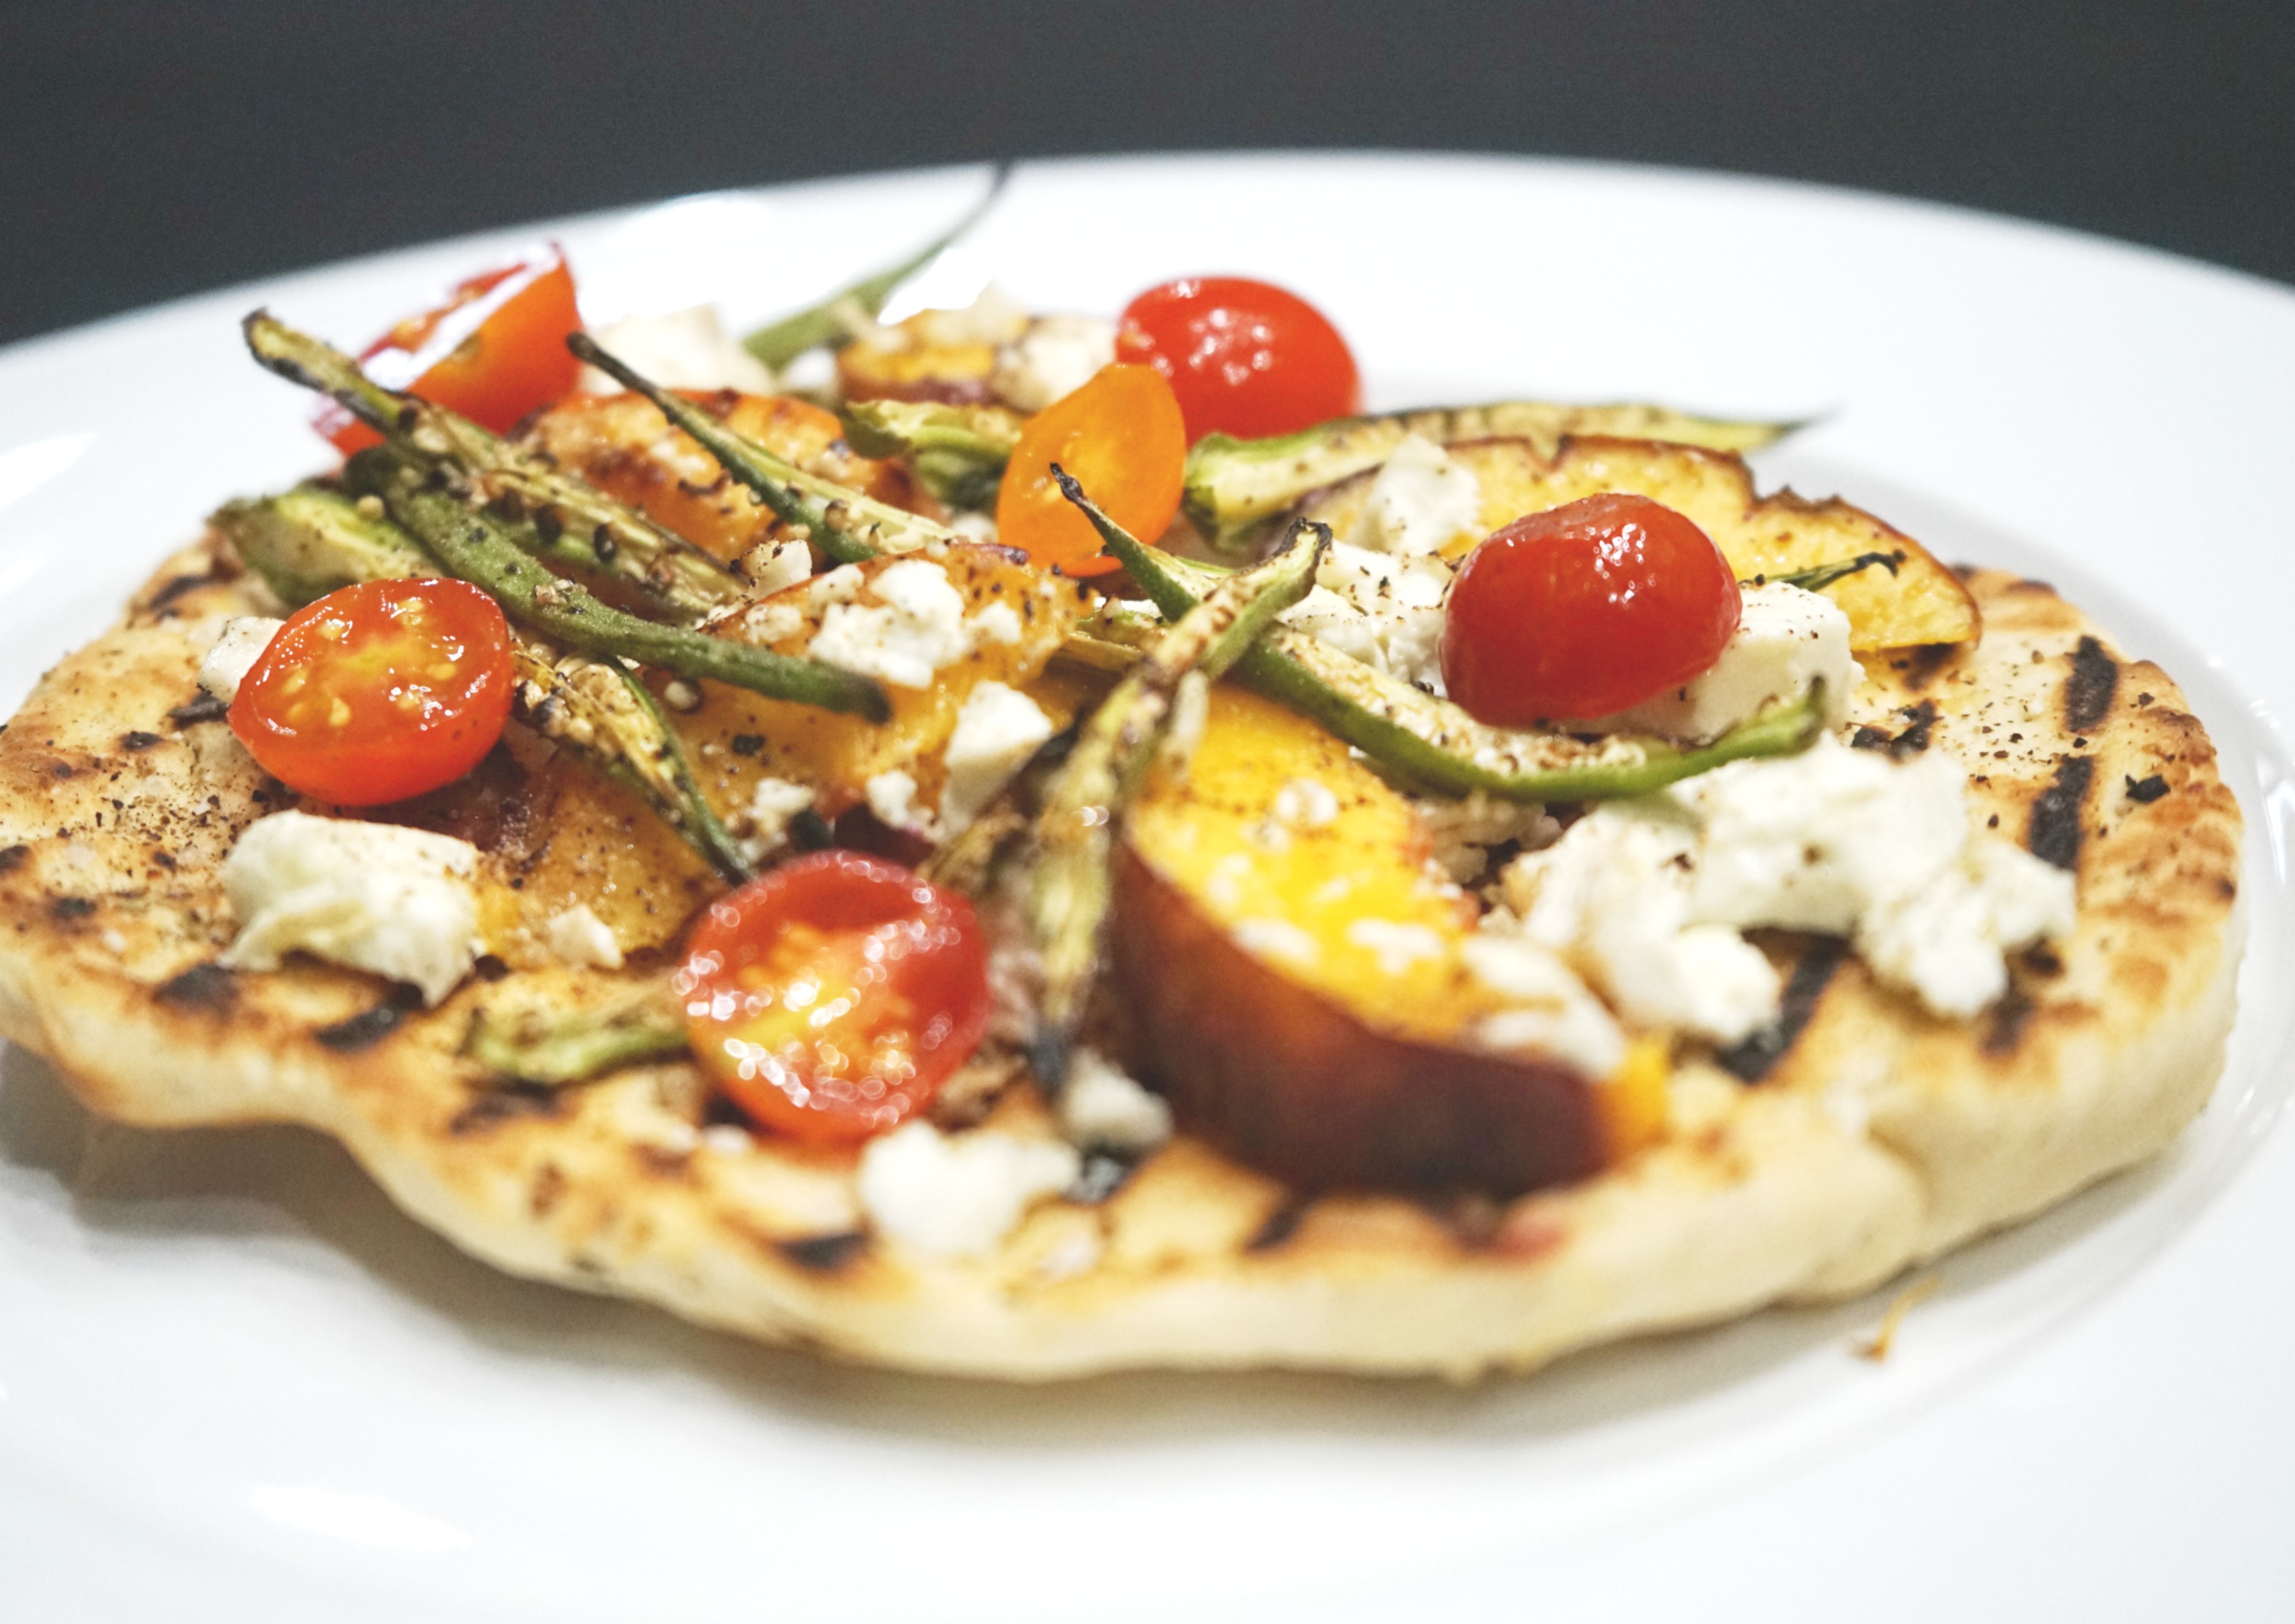 Wood Grilled Flat Bread with Charred Okra, Peaches, Cherry Tomatoes & Goat Cheese